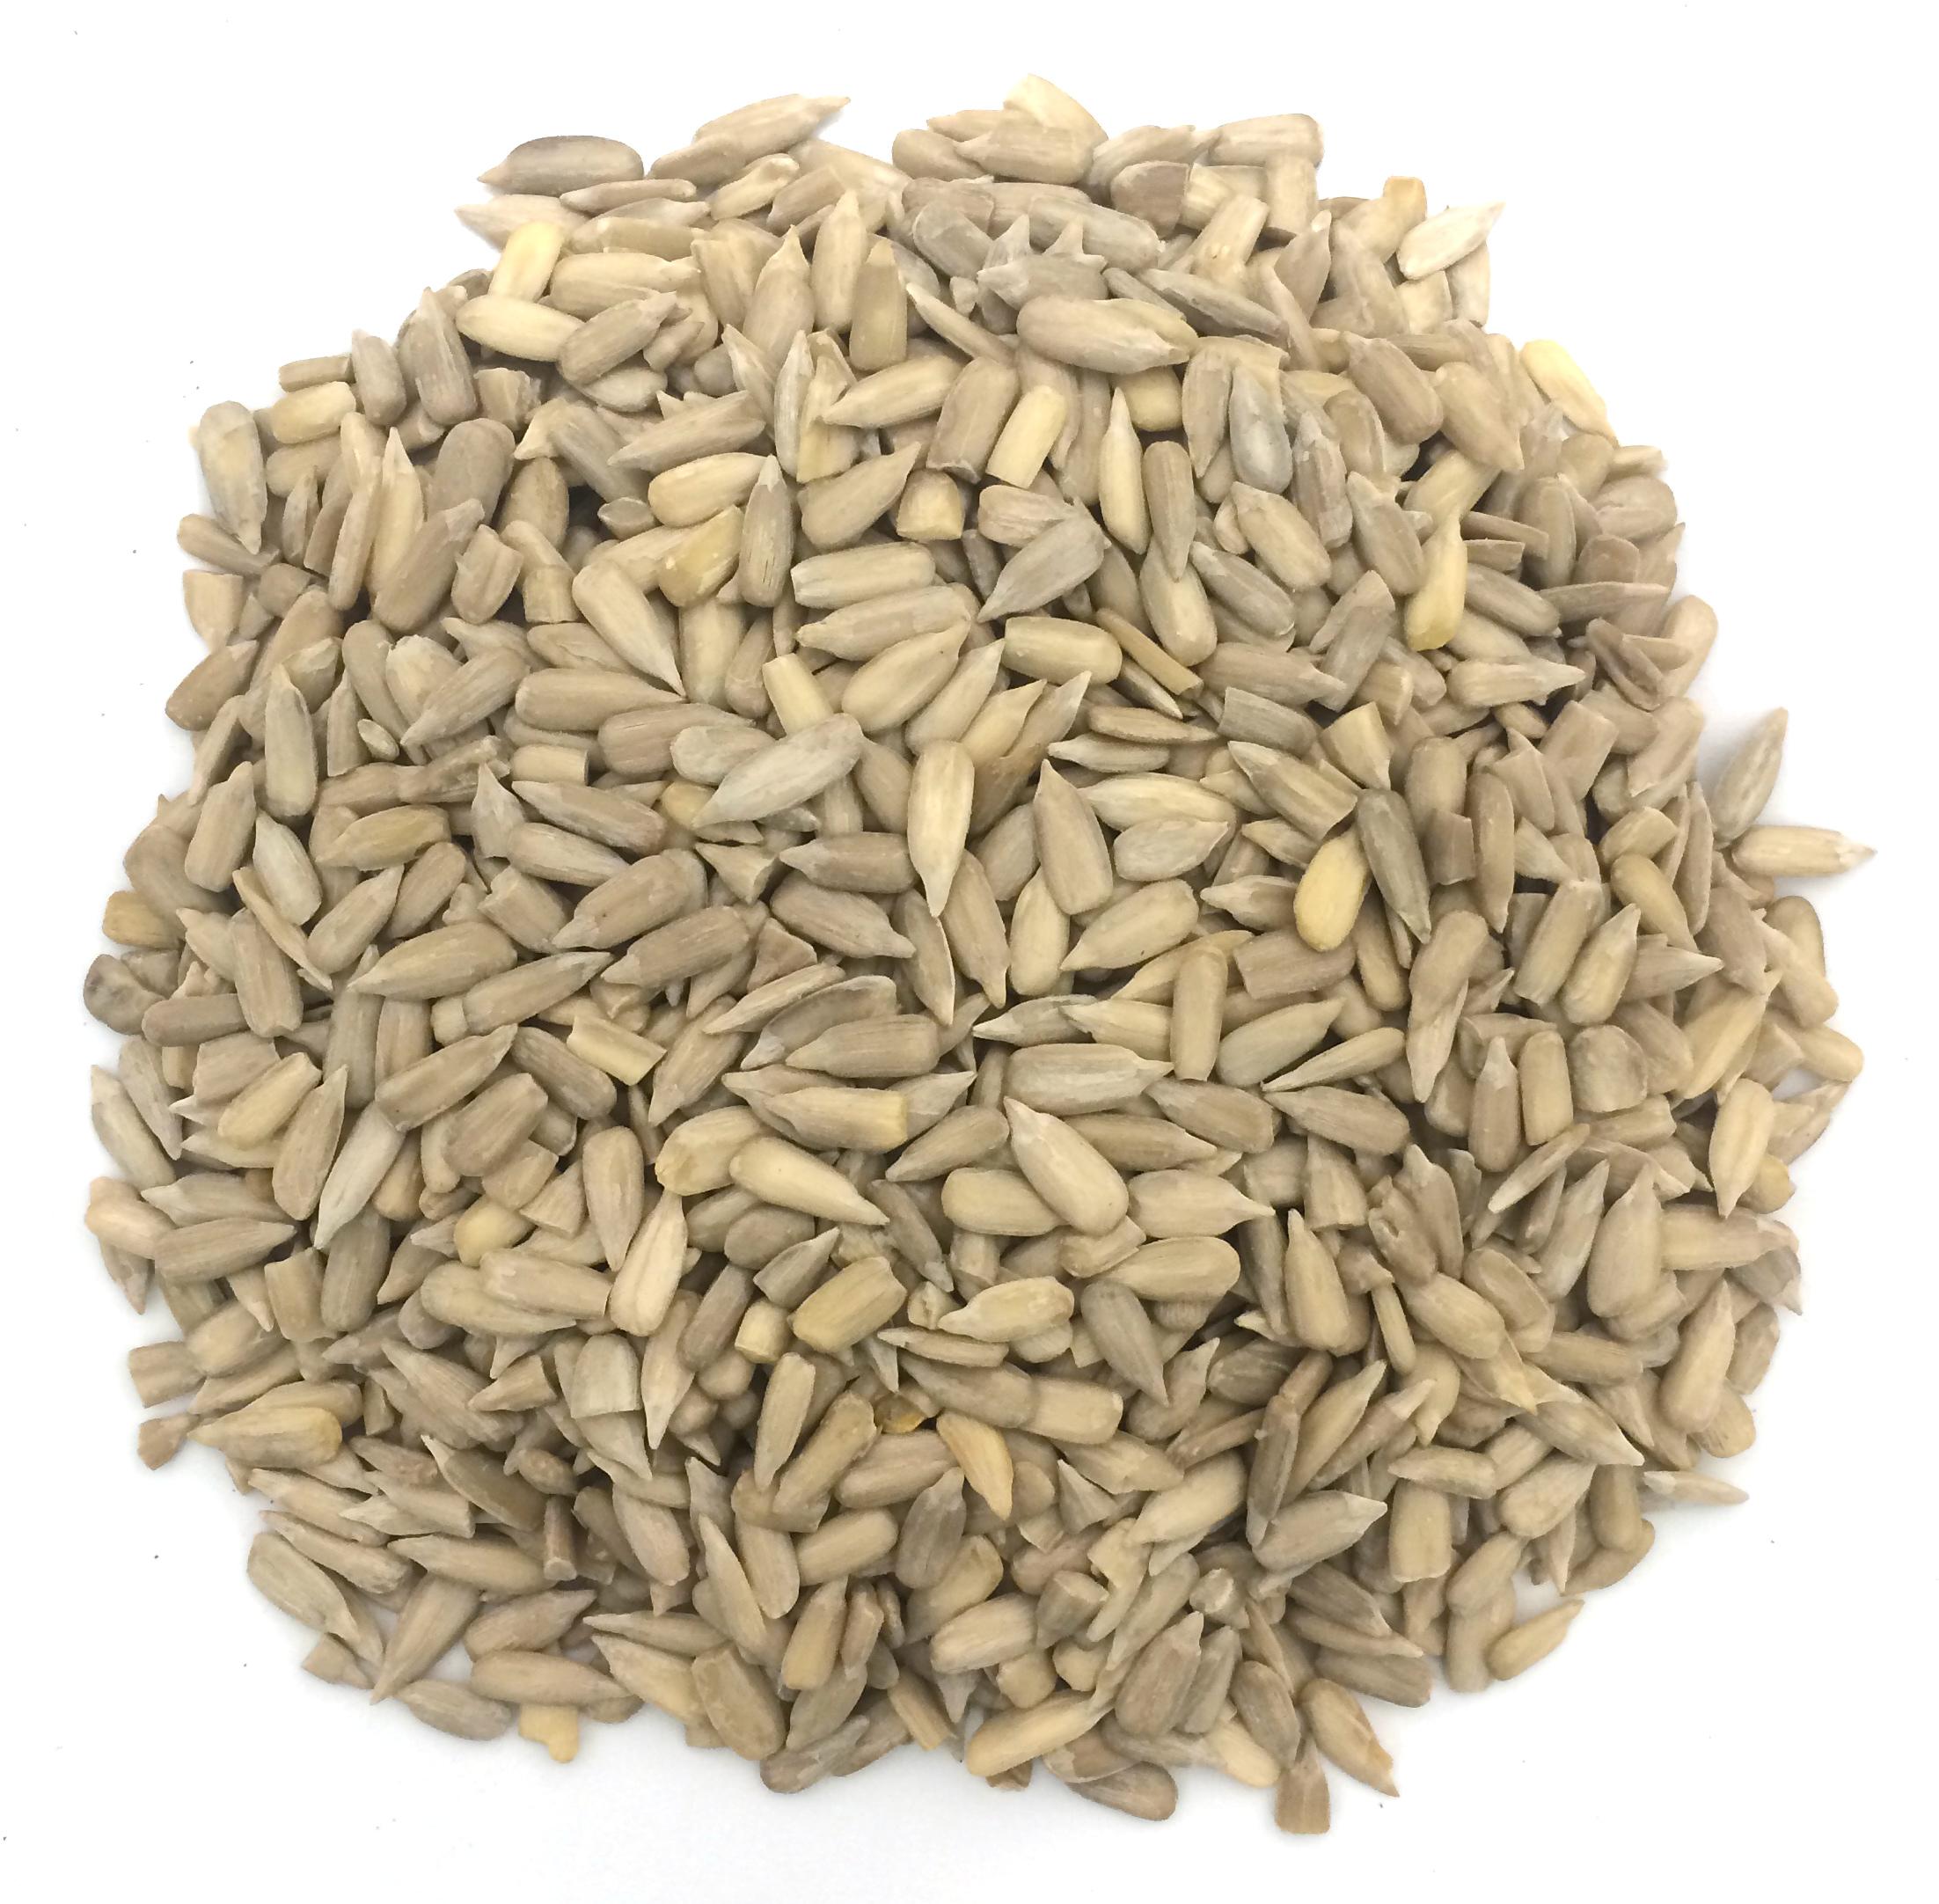 Product Organic Raw Sprouted Sunflower Seeds - Healthy Truth image